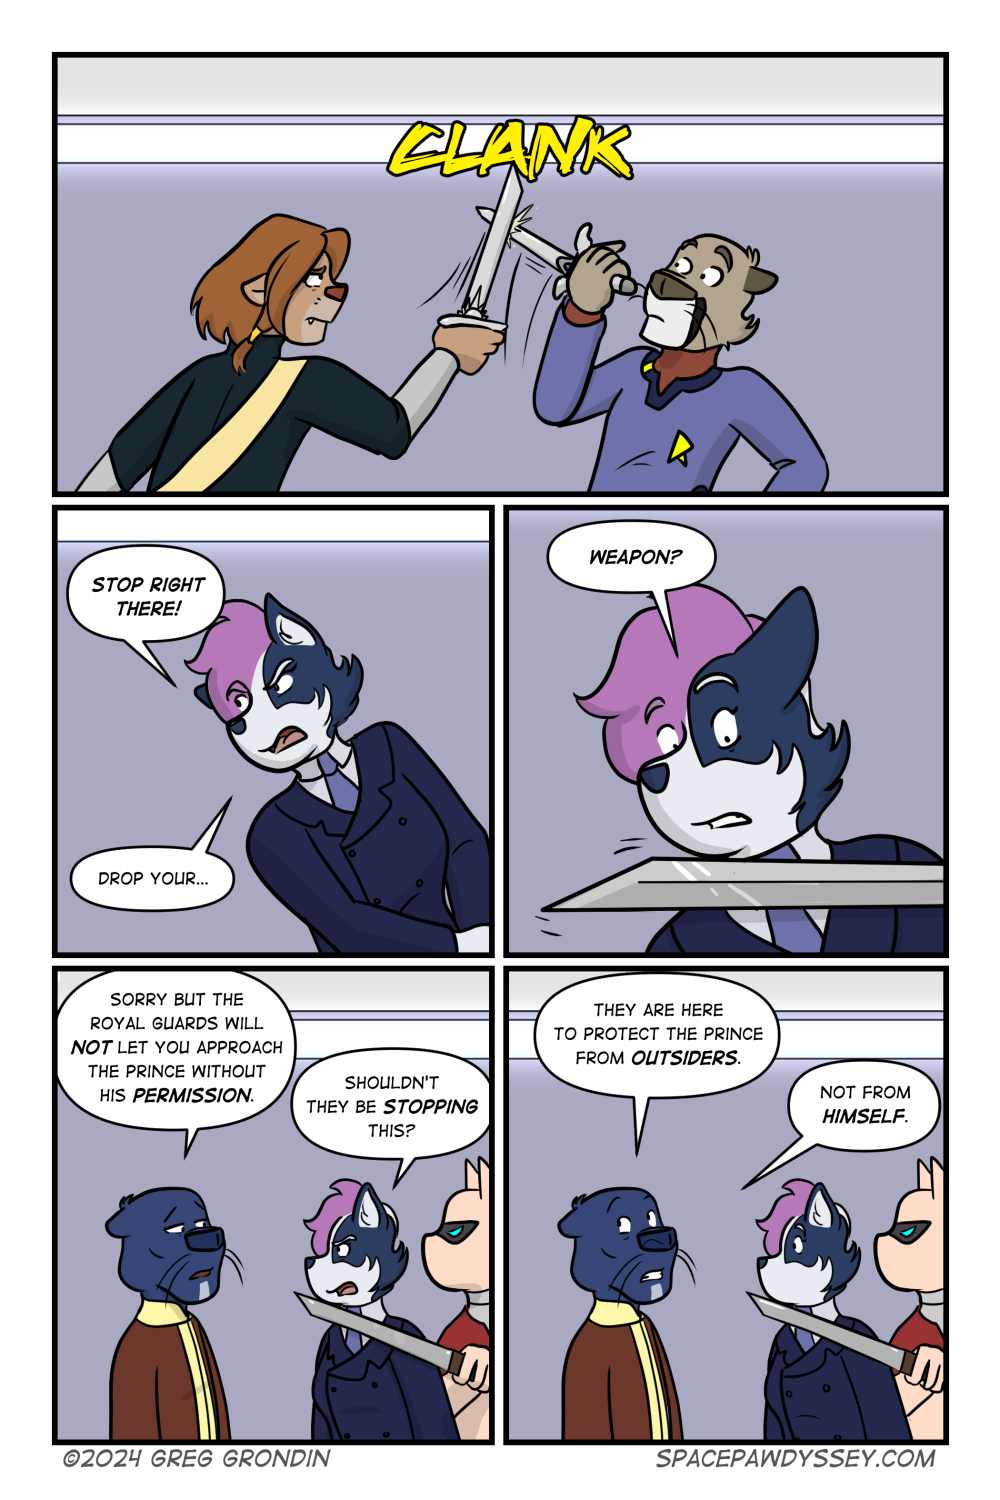 Space Pawdyssey #677